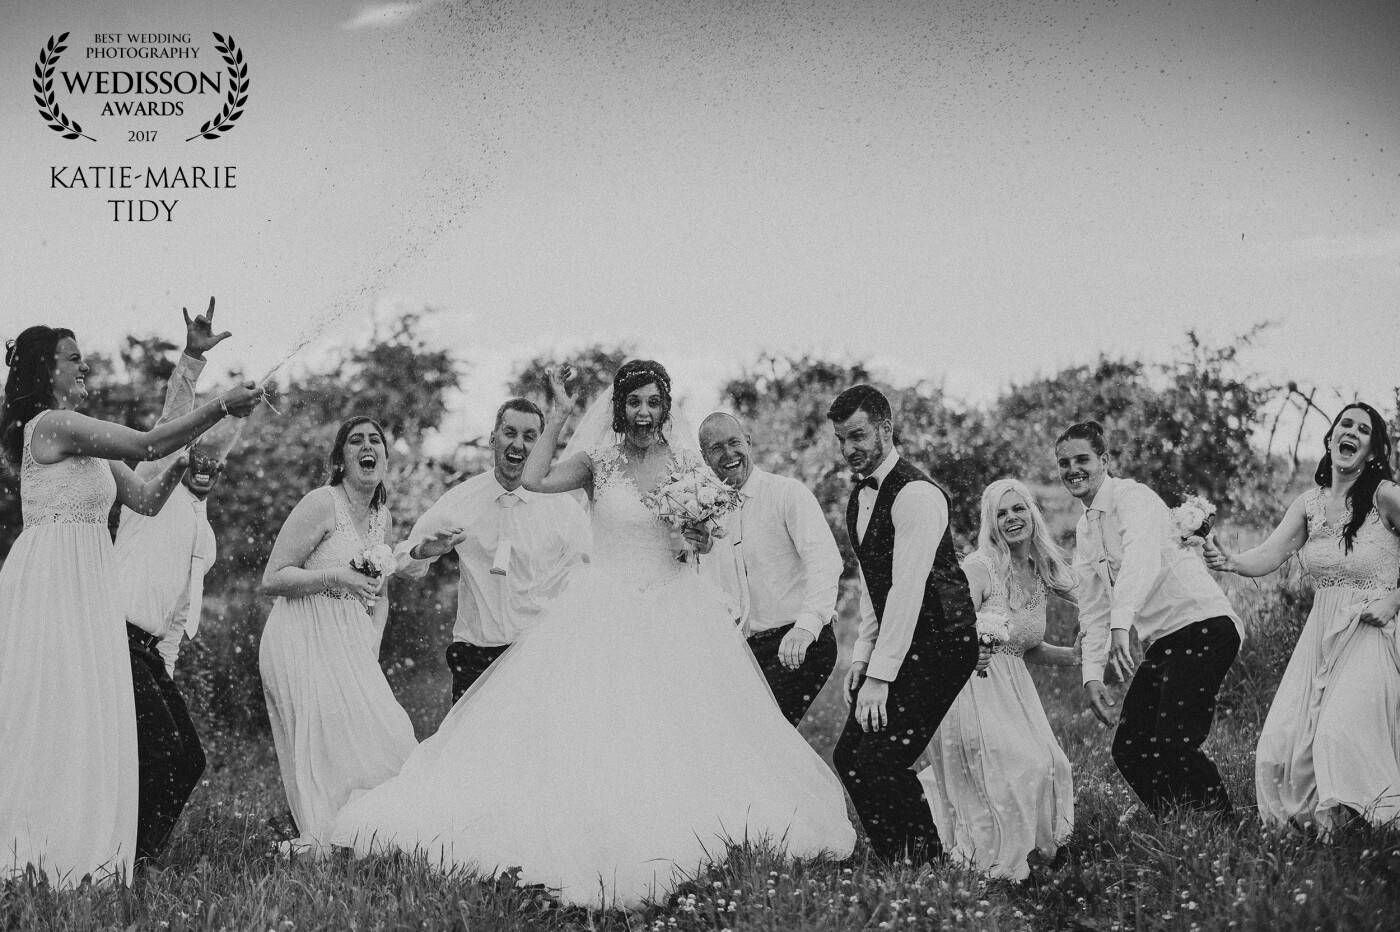 Stephanie and Pierre-Luc’s wedding was a romantic affair at a beautiful vineyard in Oka, Quebec. No detail was left unnoticed and guests enjoyed the self to the max with this fun bridal party. 